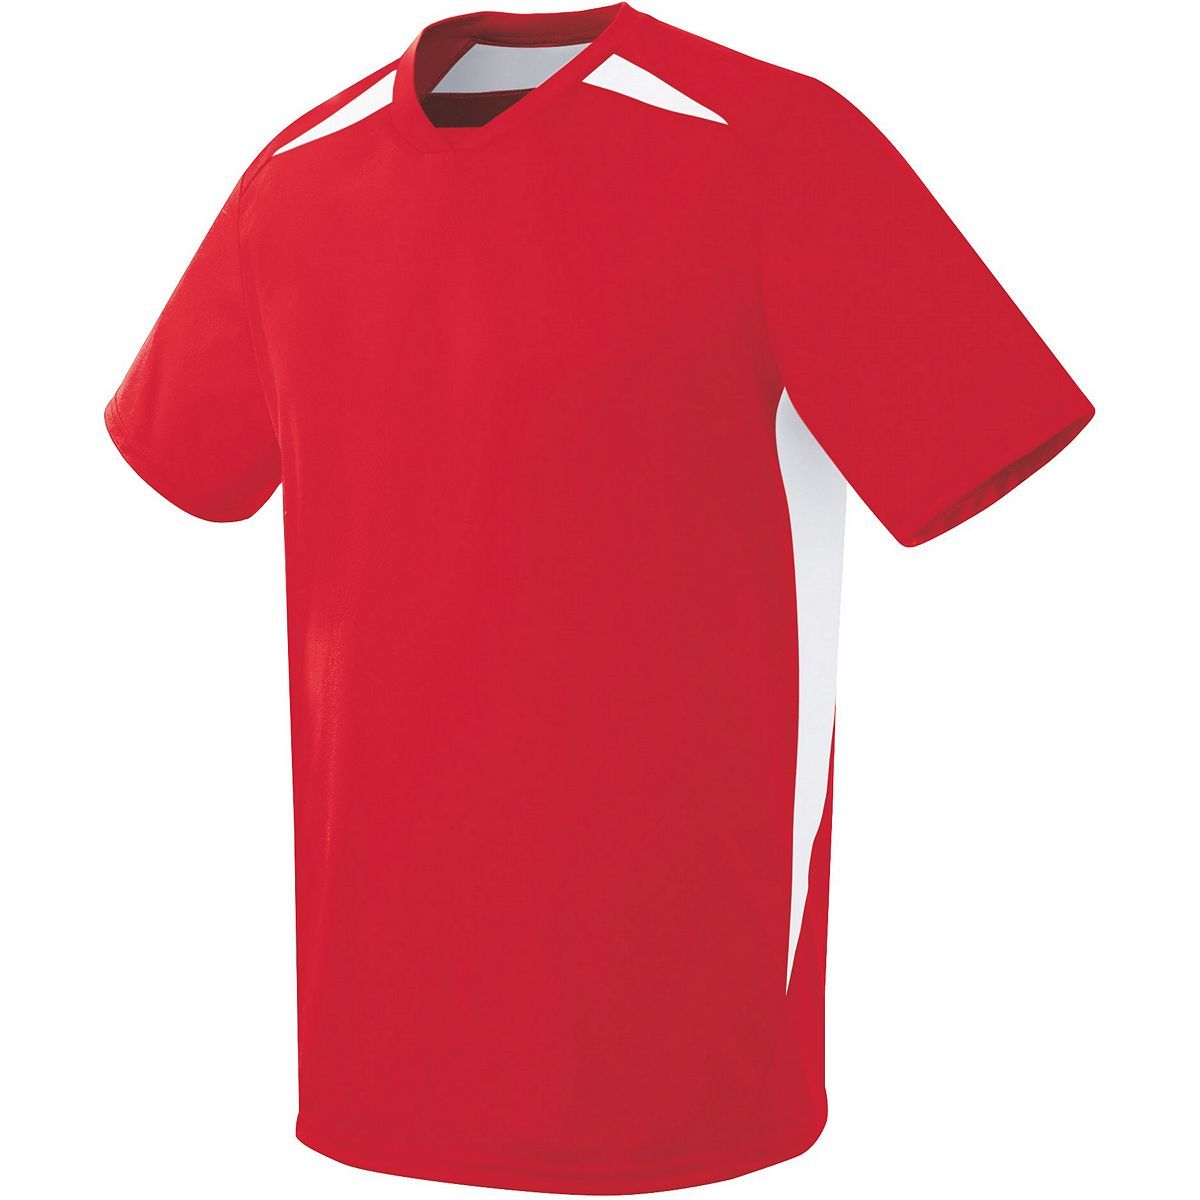 High 5 Adult Hawk Jersey in Scarlet/White  -Part of the Adult, Adult-Jersey, High5-Products, Soccer, Shirts, All-Sports-1 product lines at KanaleyCreations.com